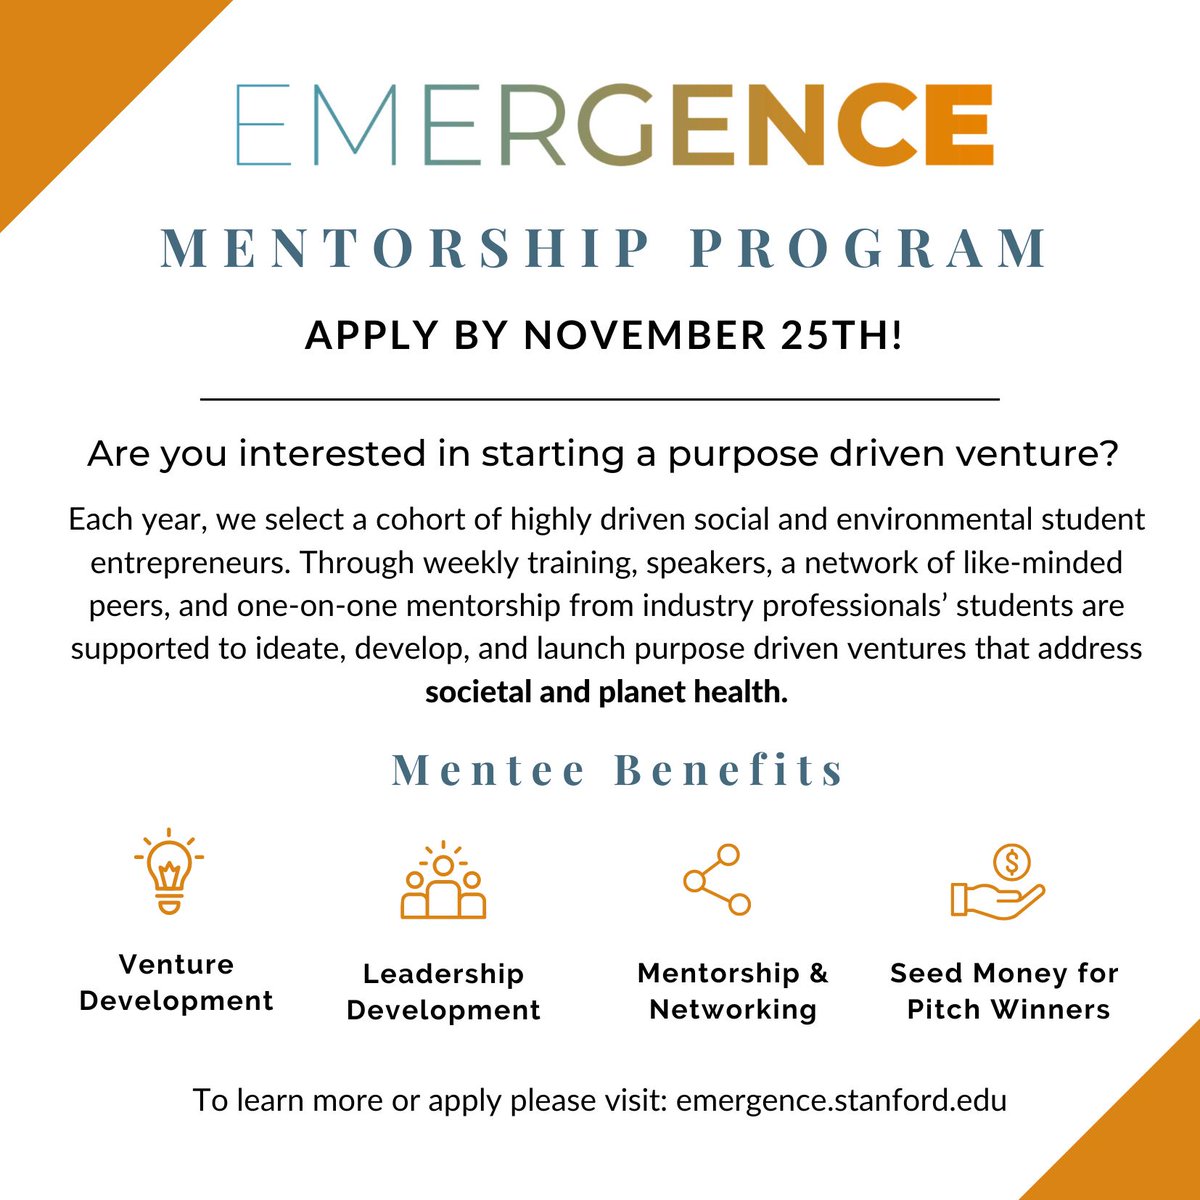 Our colleagues at Stanford Emergence (@stanfordemerge) are accepting applications for this fantastic student mentorship program through November 25. Learn more and apply 👇 emergence.stanford.edu/our-programs/m…